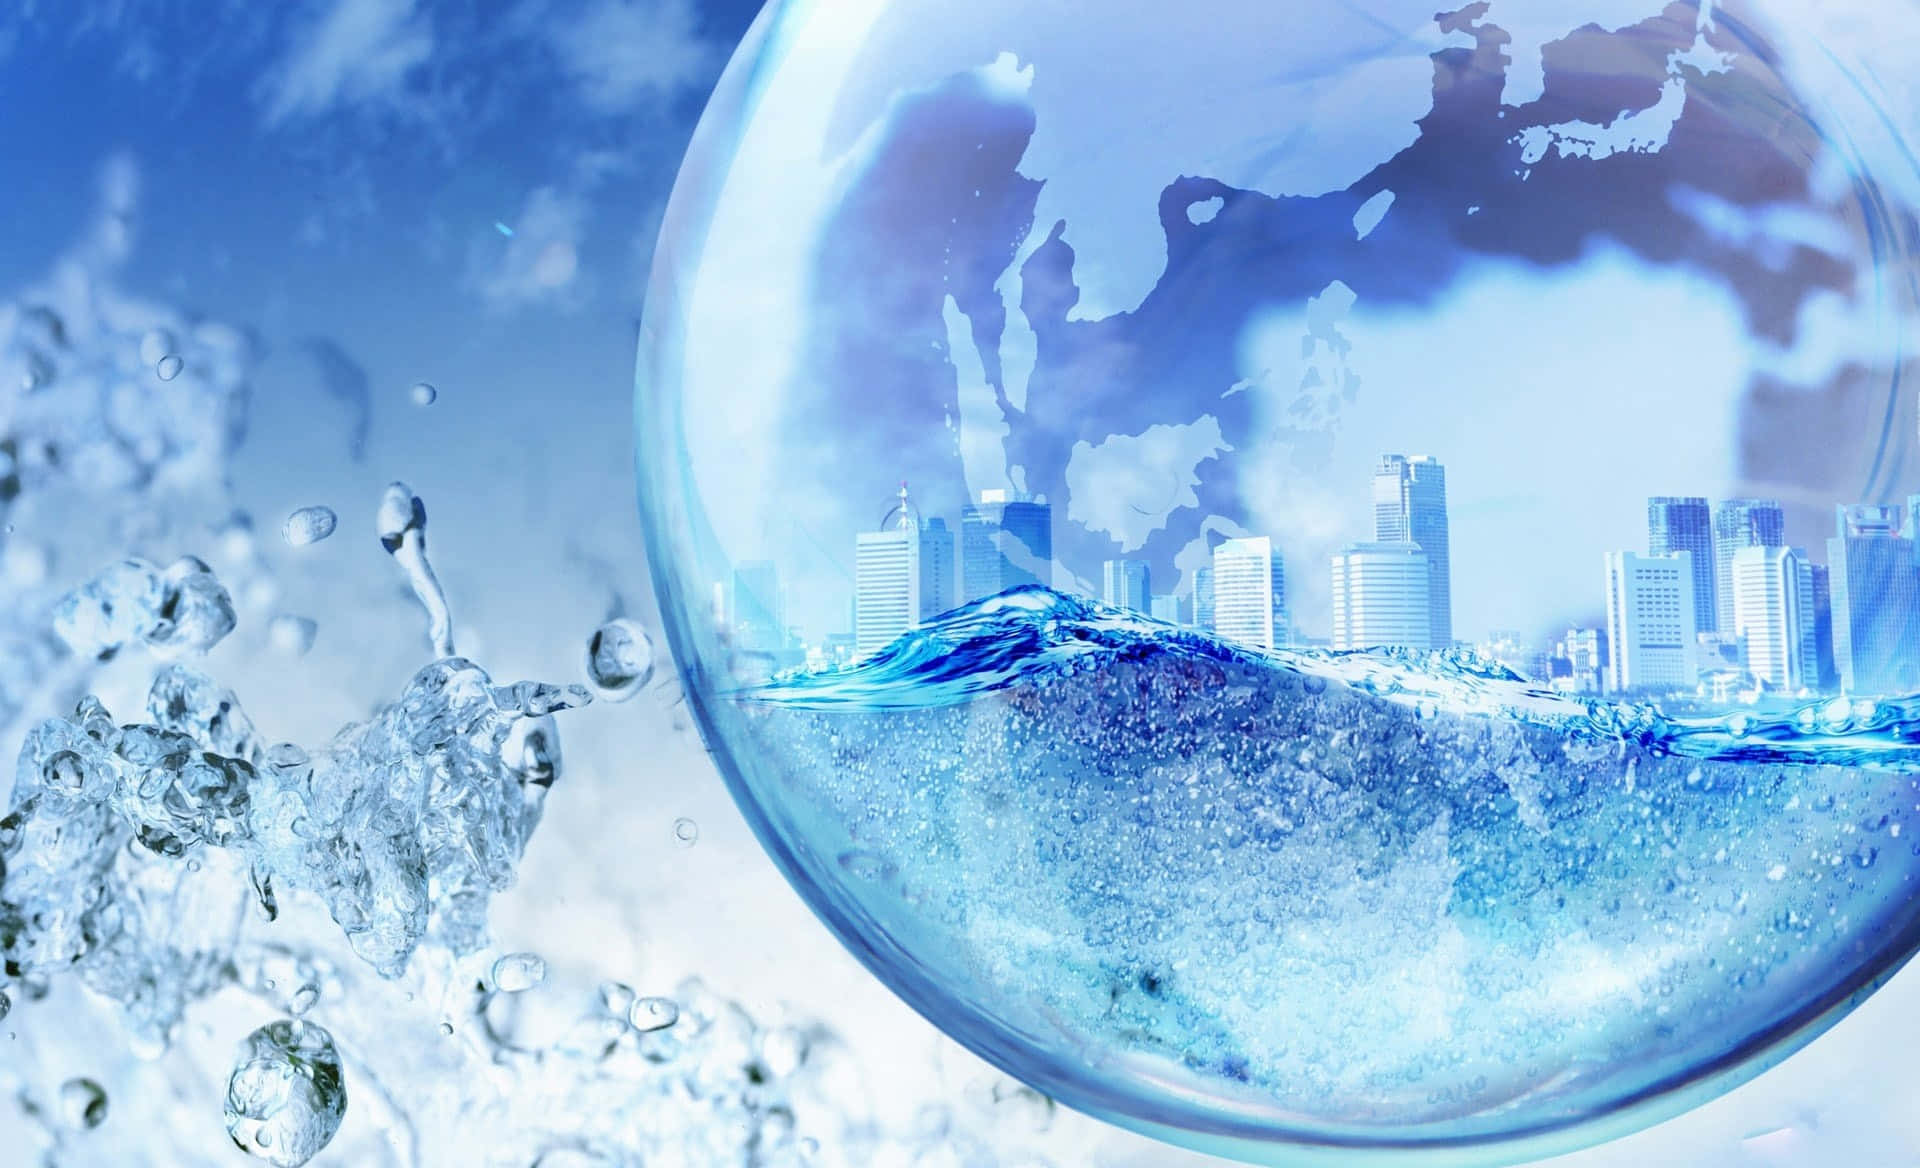 Cityscapein Water Droplet Wallpaper